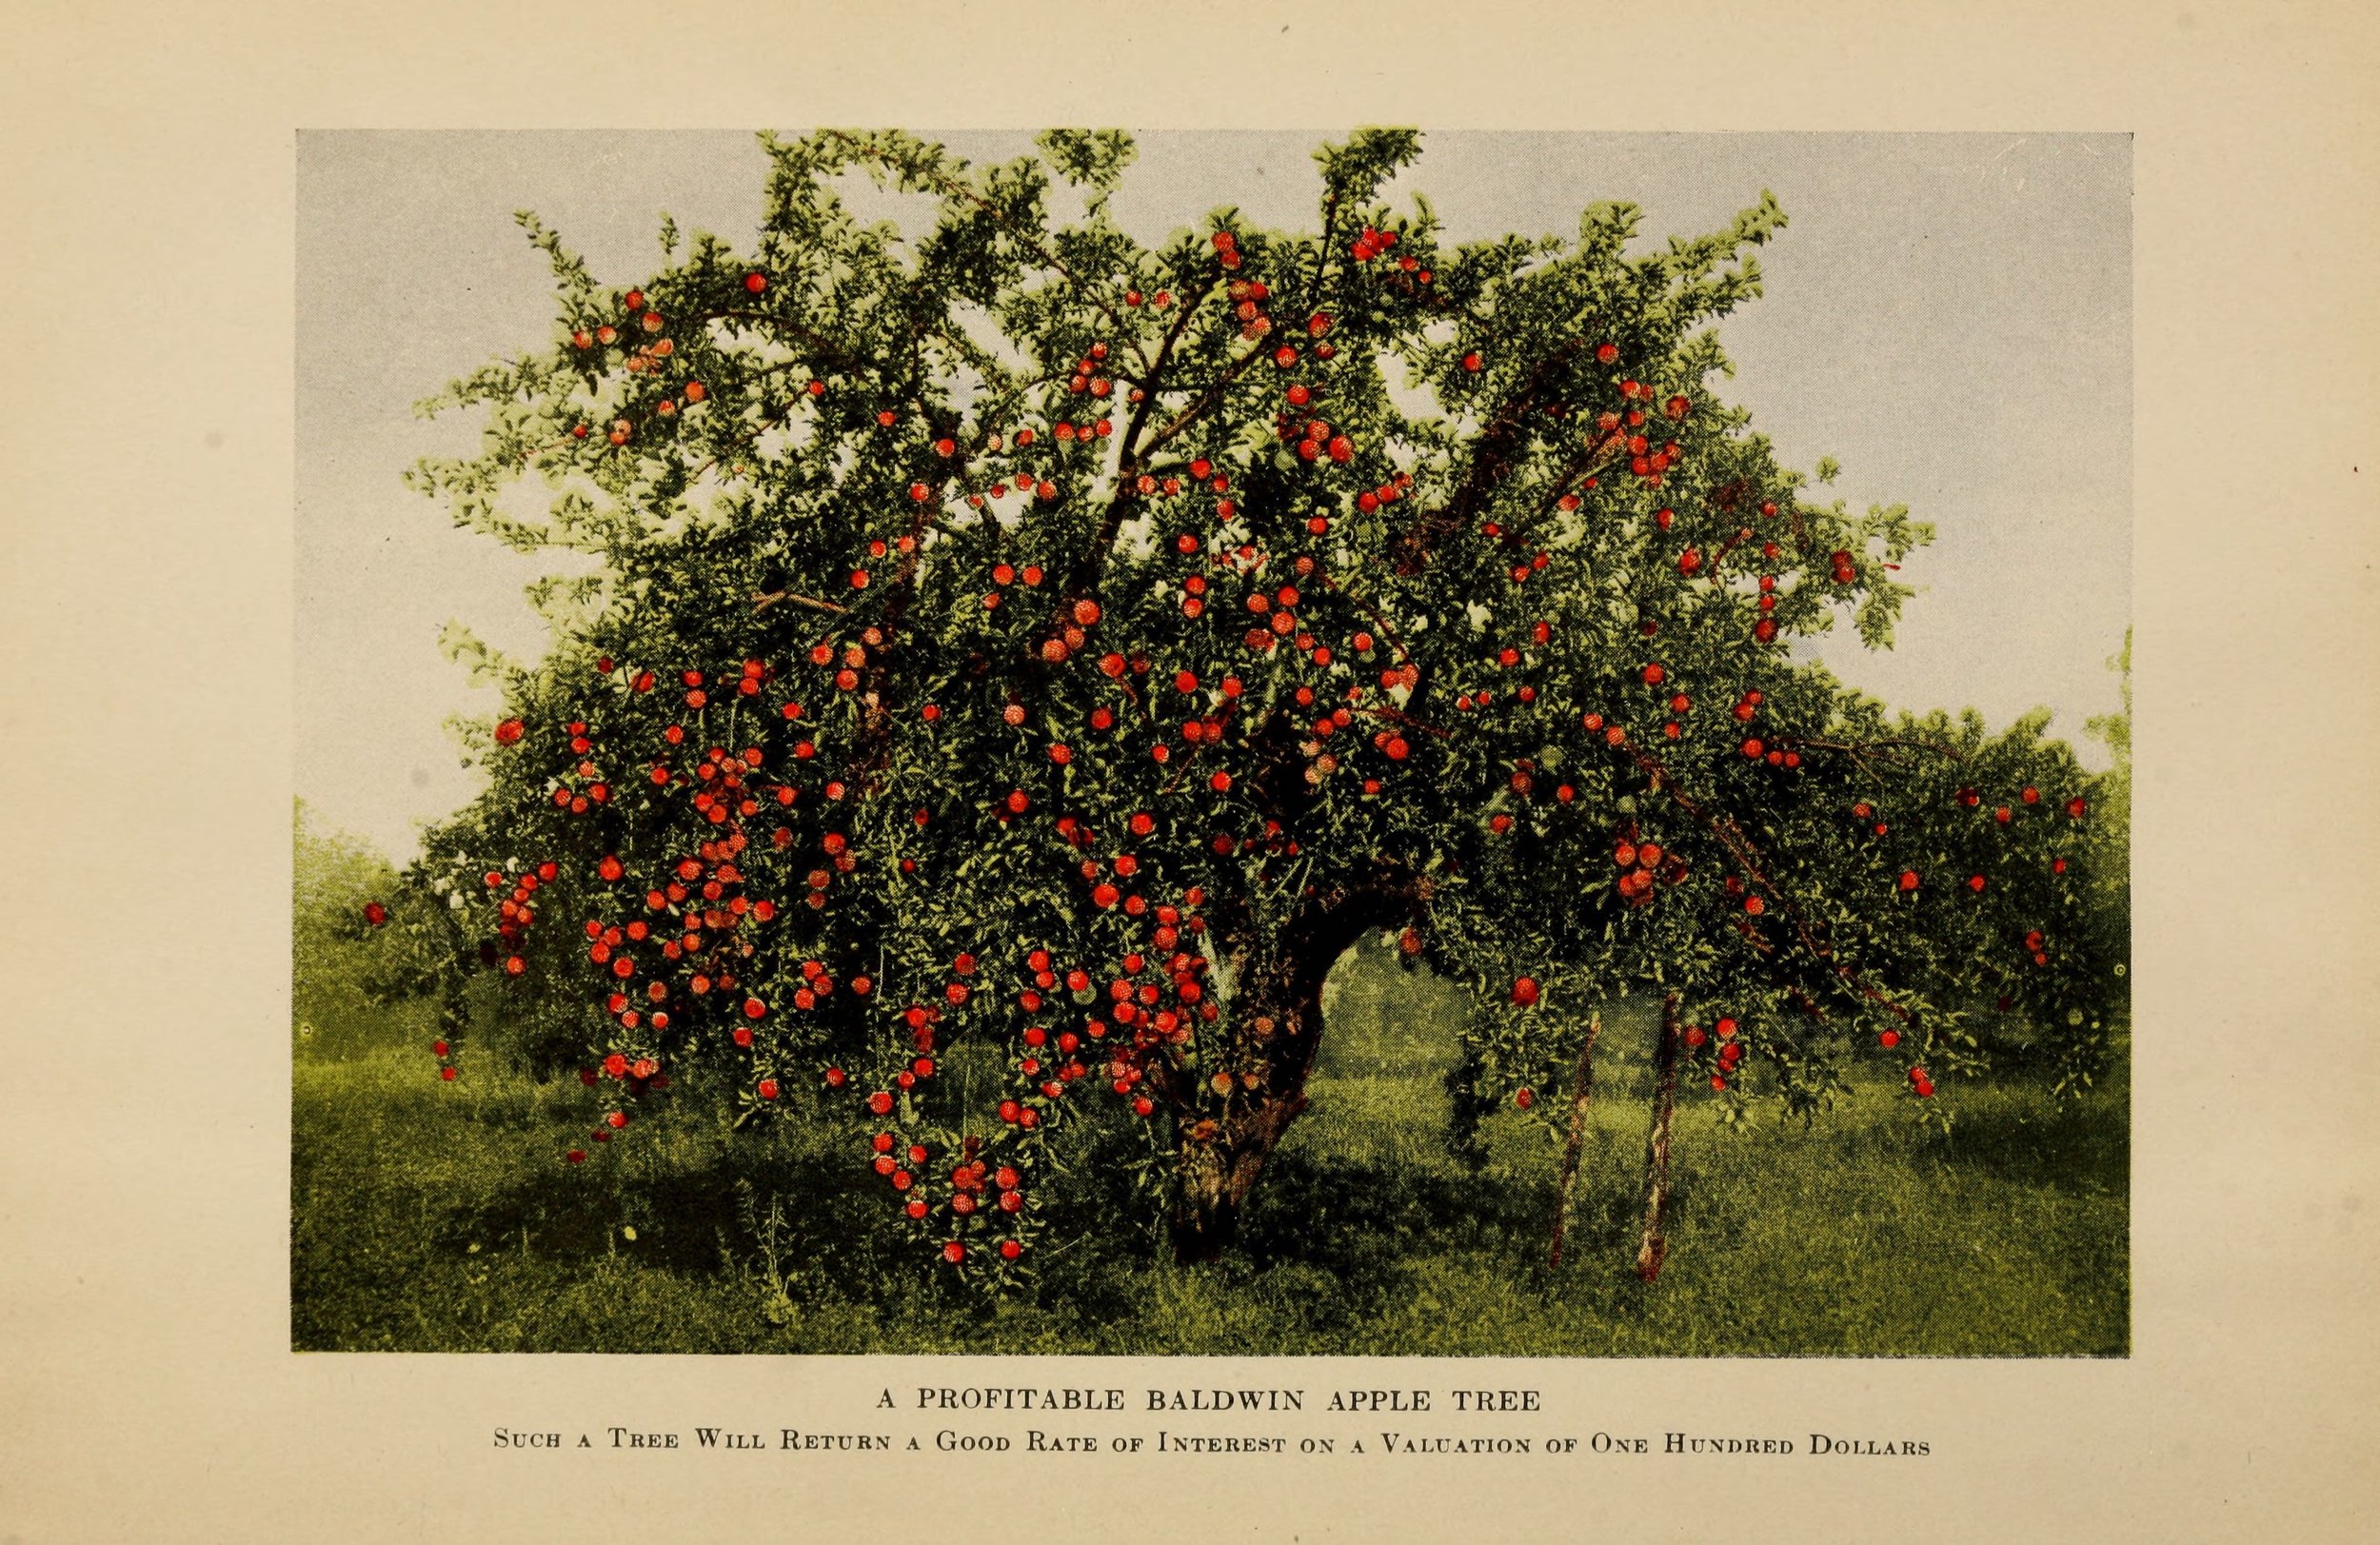 Apple maturity in Montana - Western Agricultural Research Center